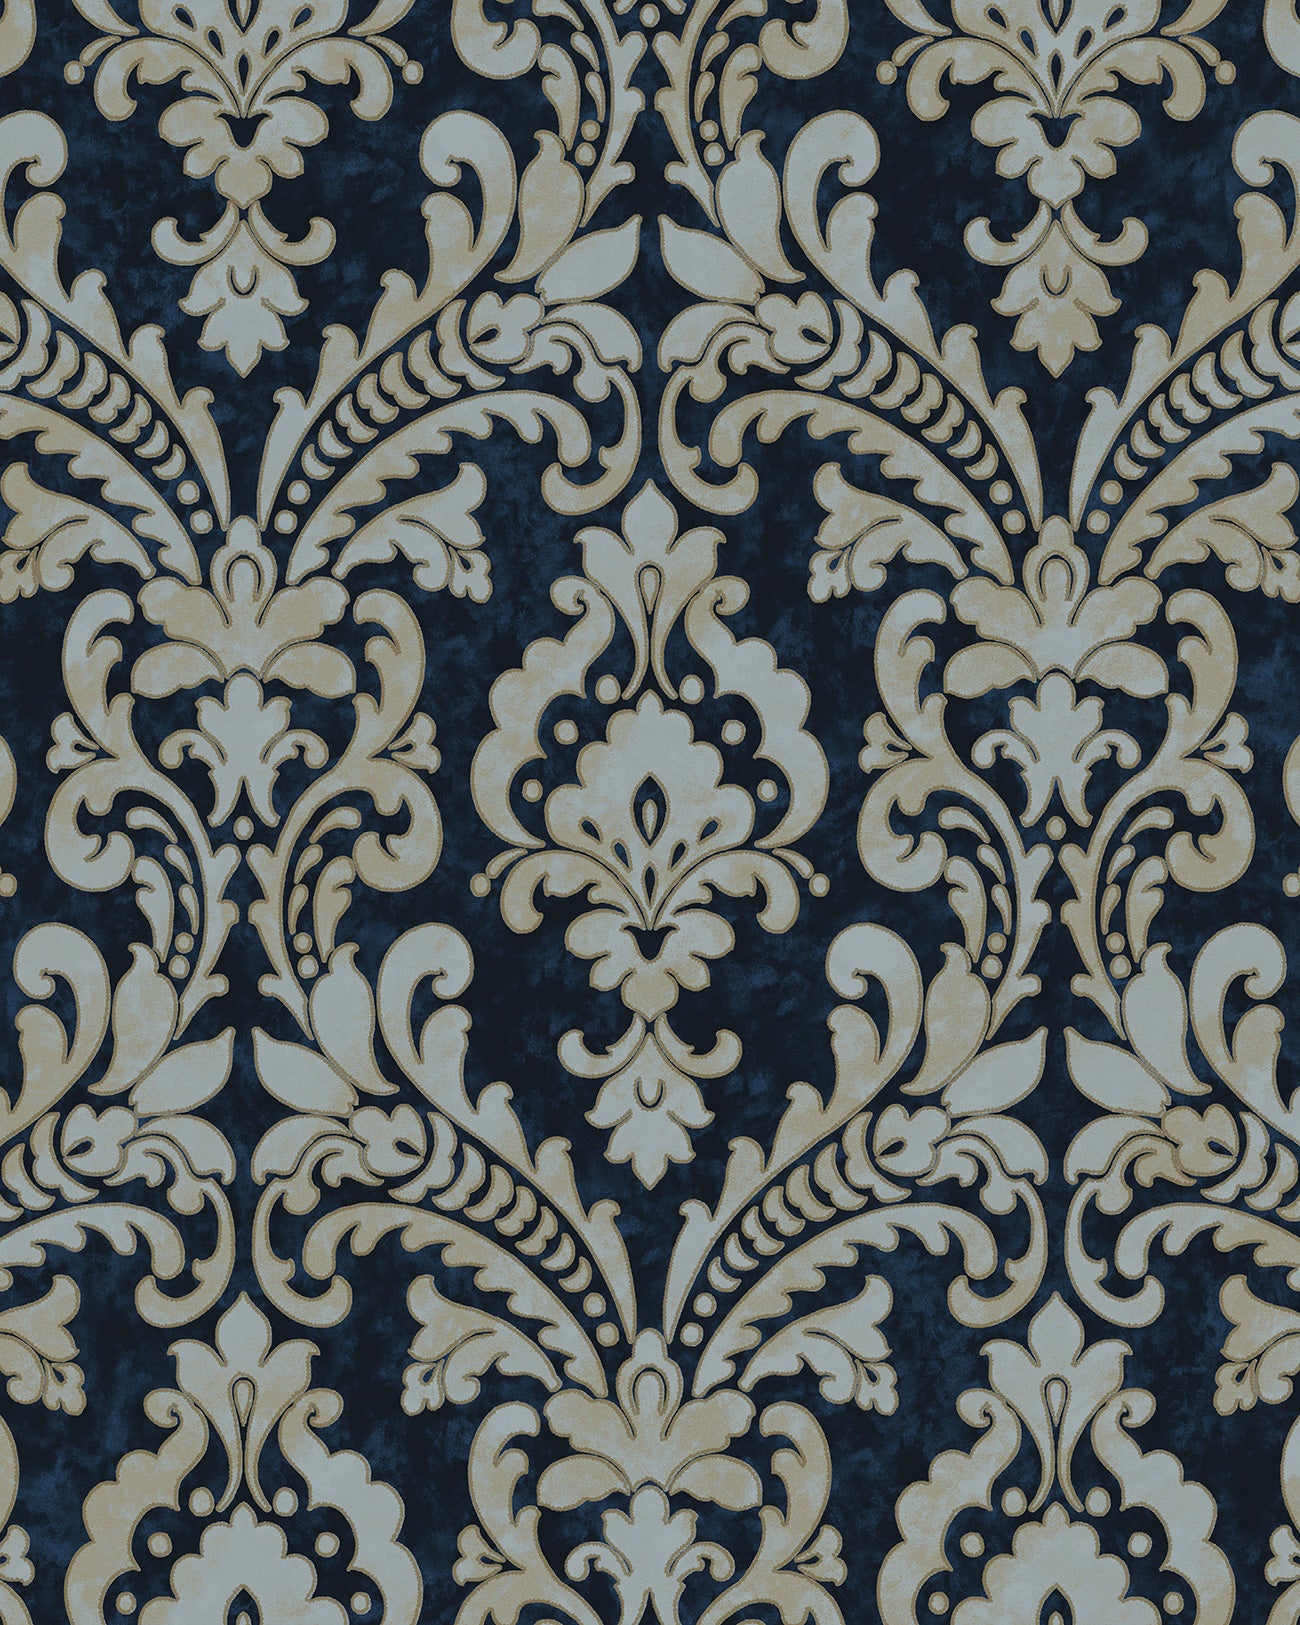 Baroque wallpaper Profhome VD219175-DI hot embossed non-woven wallpaper embossed with ornaments satin blue gold light gray 5.33 m2